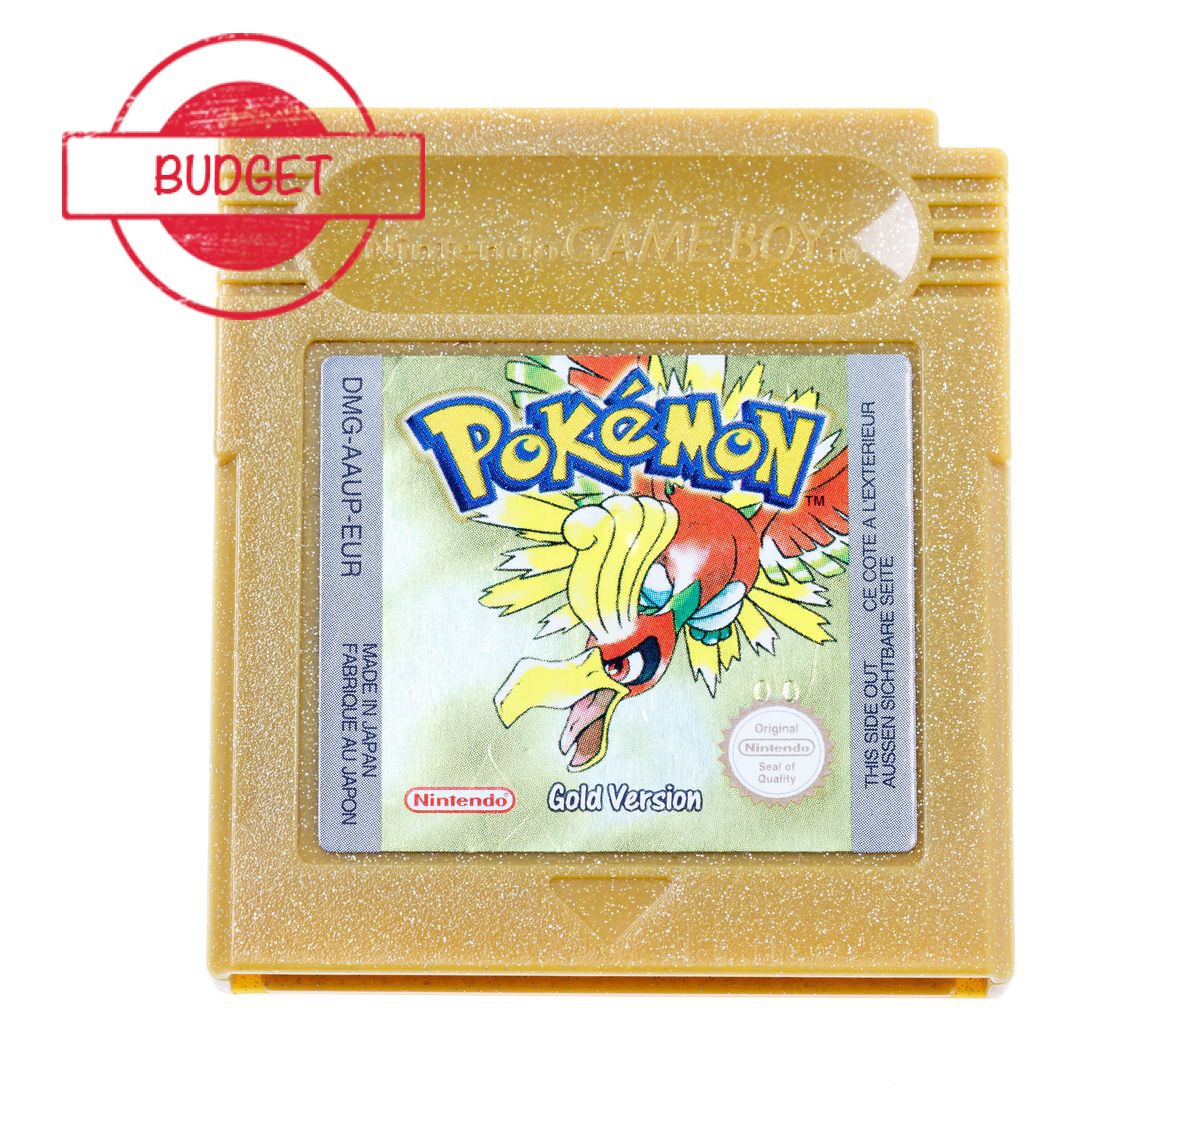 Pokemon Gold - Budget (French) - Gameboy Color Games